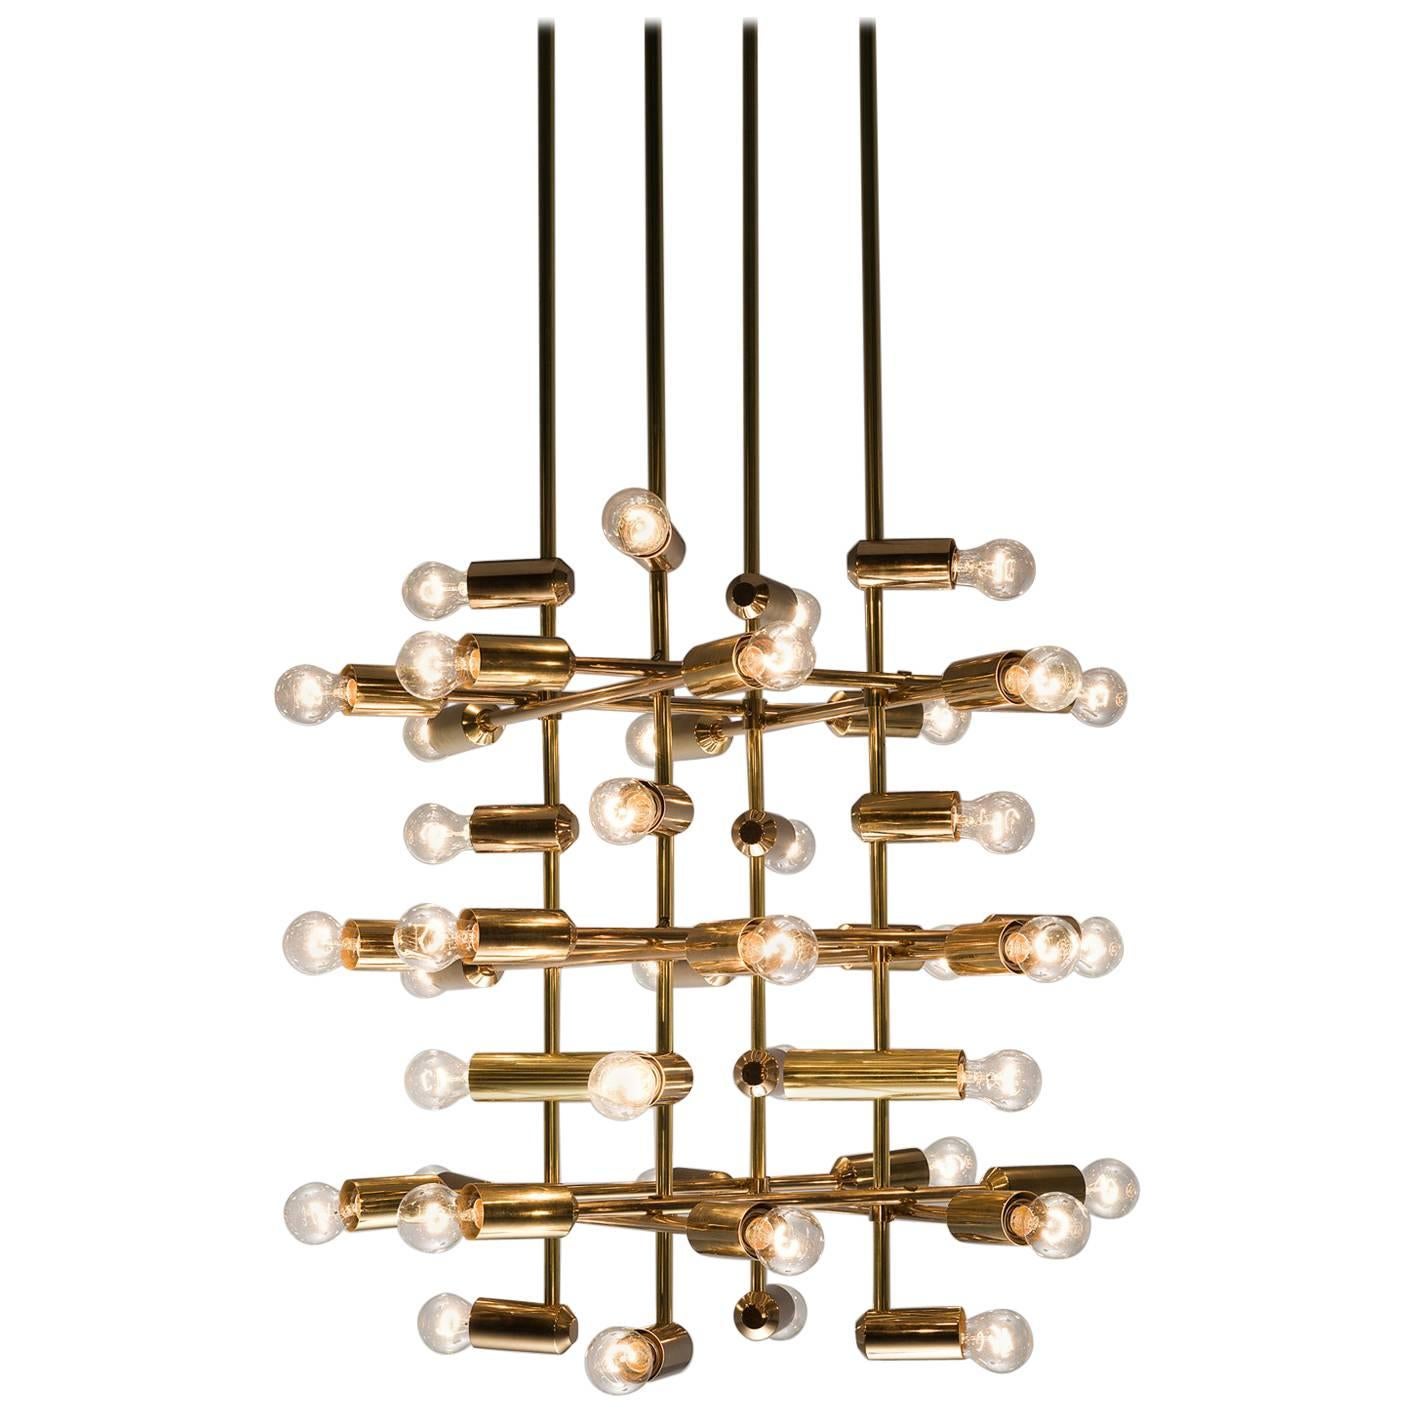 Set of 20 Large Brass Chandeliers with Forty Bulbs